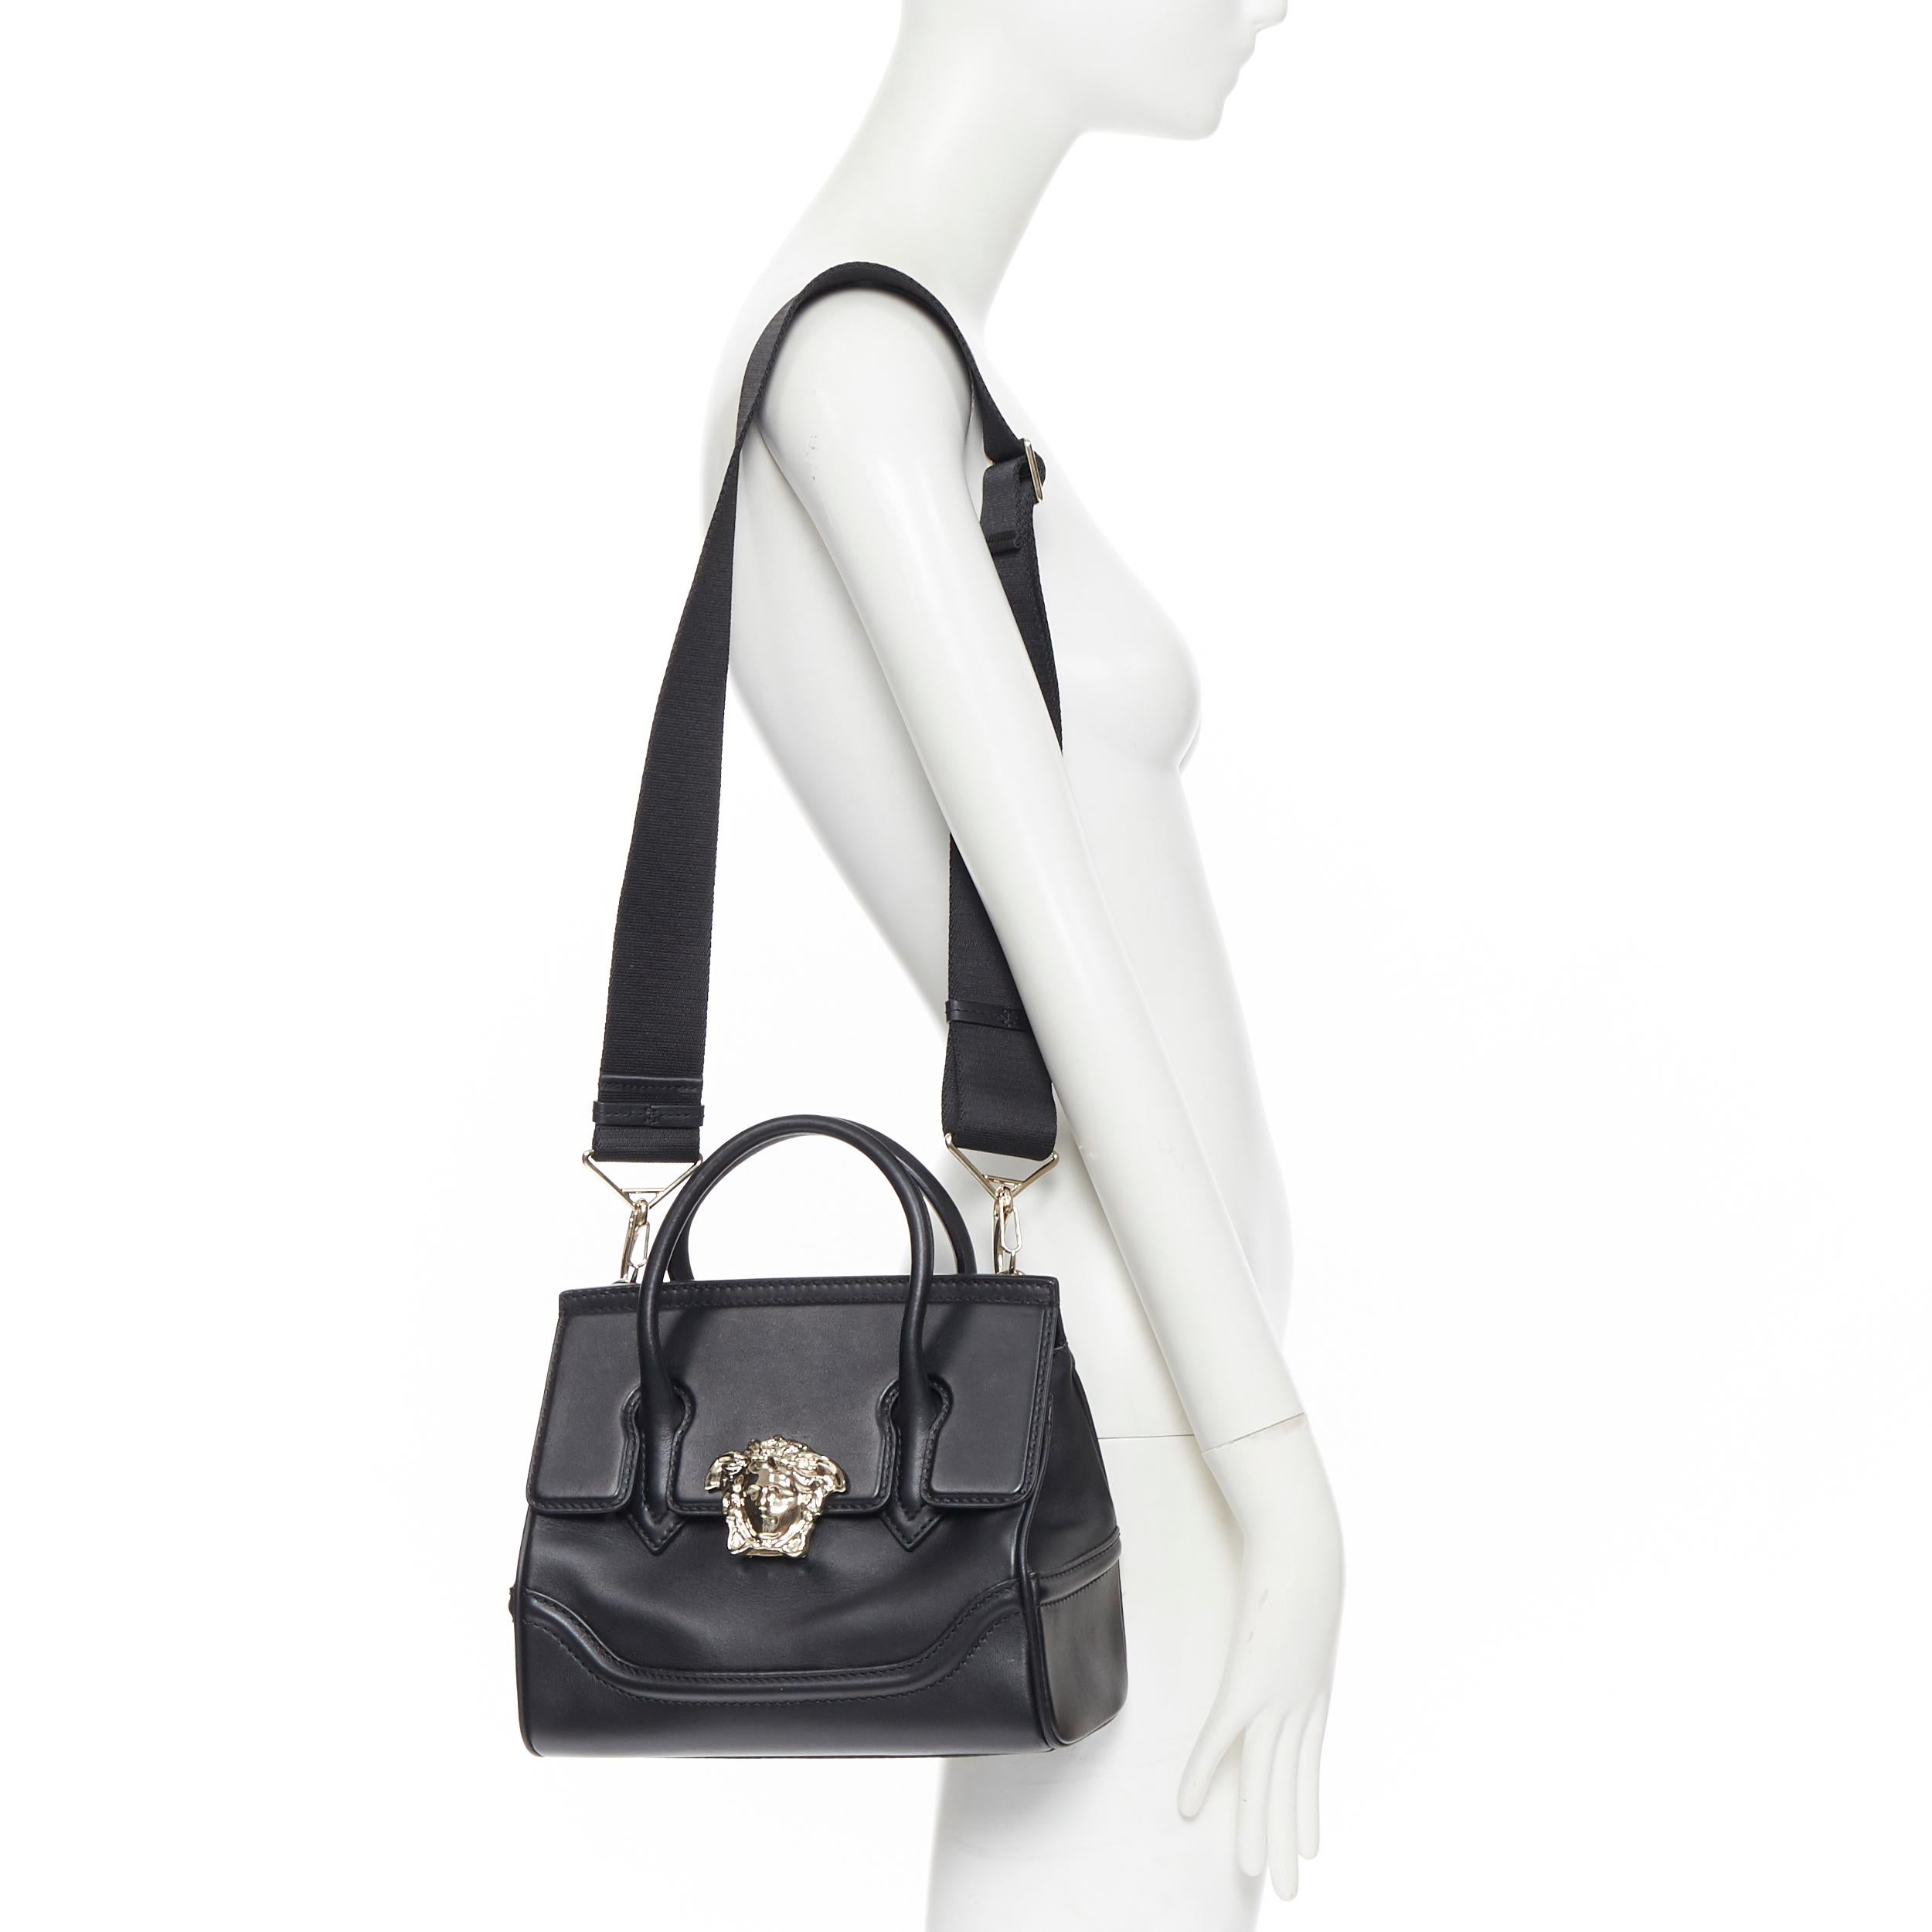 new VERSACE Palazzo Empire Small black leather gold Medusa flap shoulder bag
Brand: Versace
Designer: Donatella Versace
Model Name / Style: Versace Empire
Material: Leather
Color: Black
Pattern: Solid
Closure: Clasp
Extra Detail: Palazzo Empire